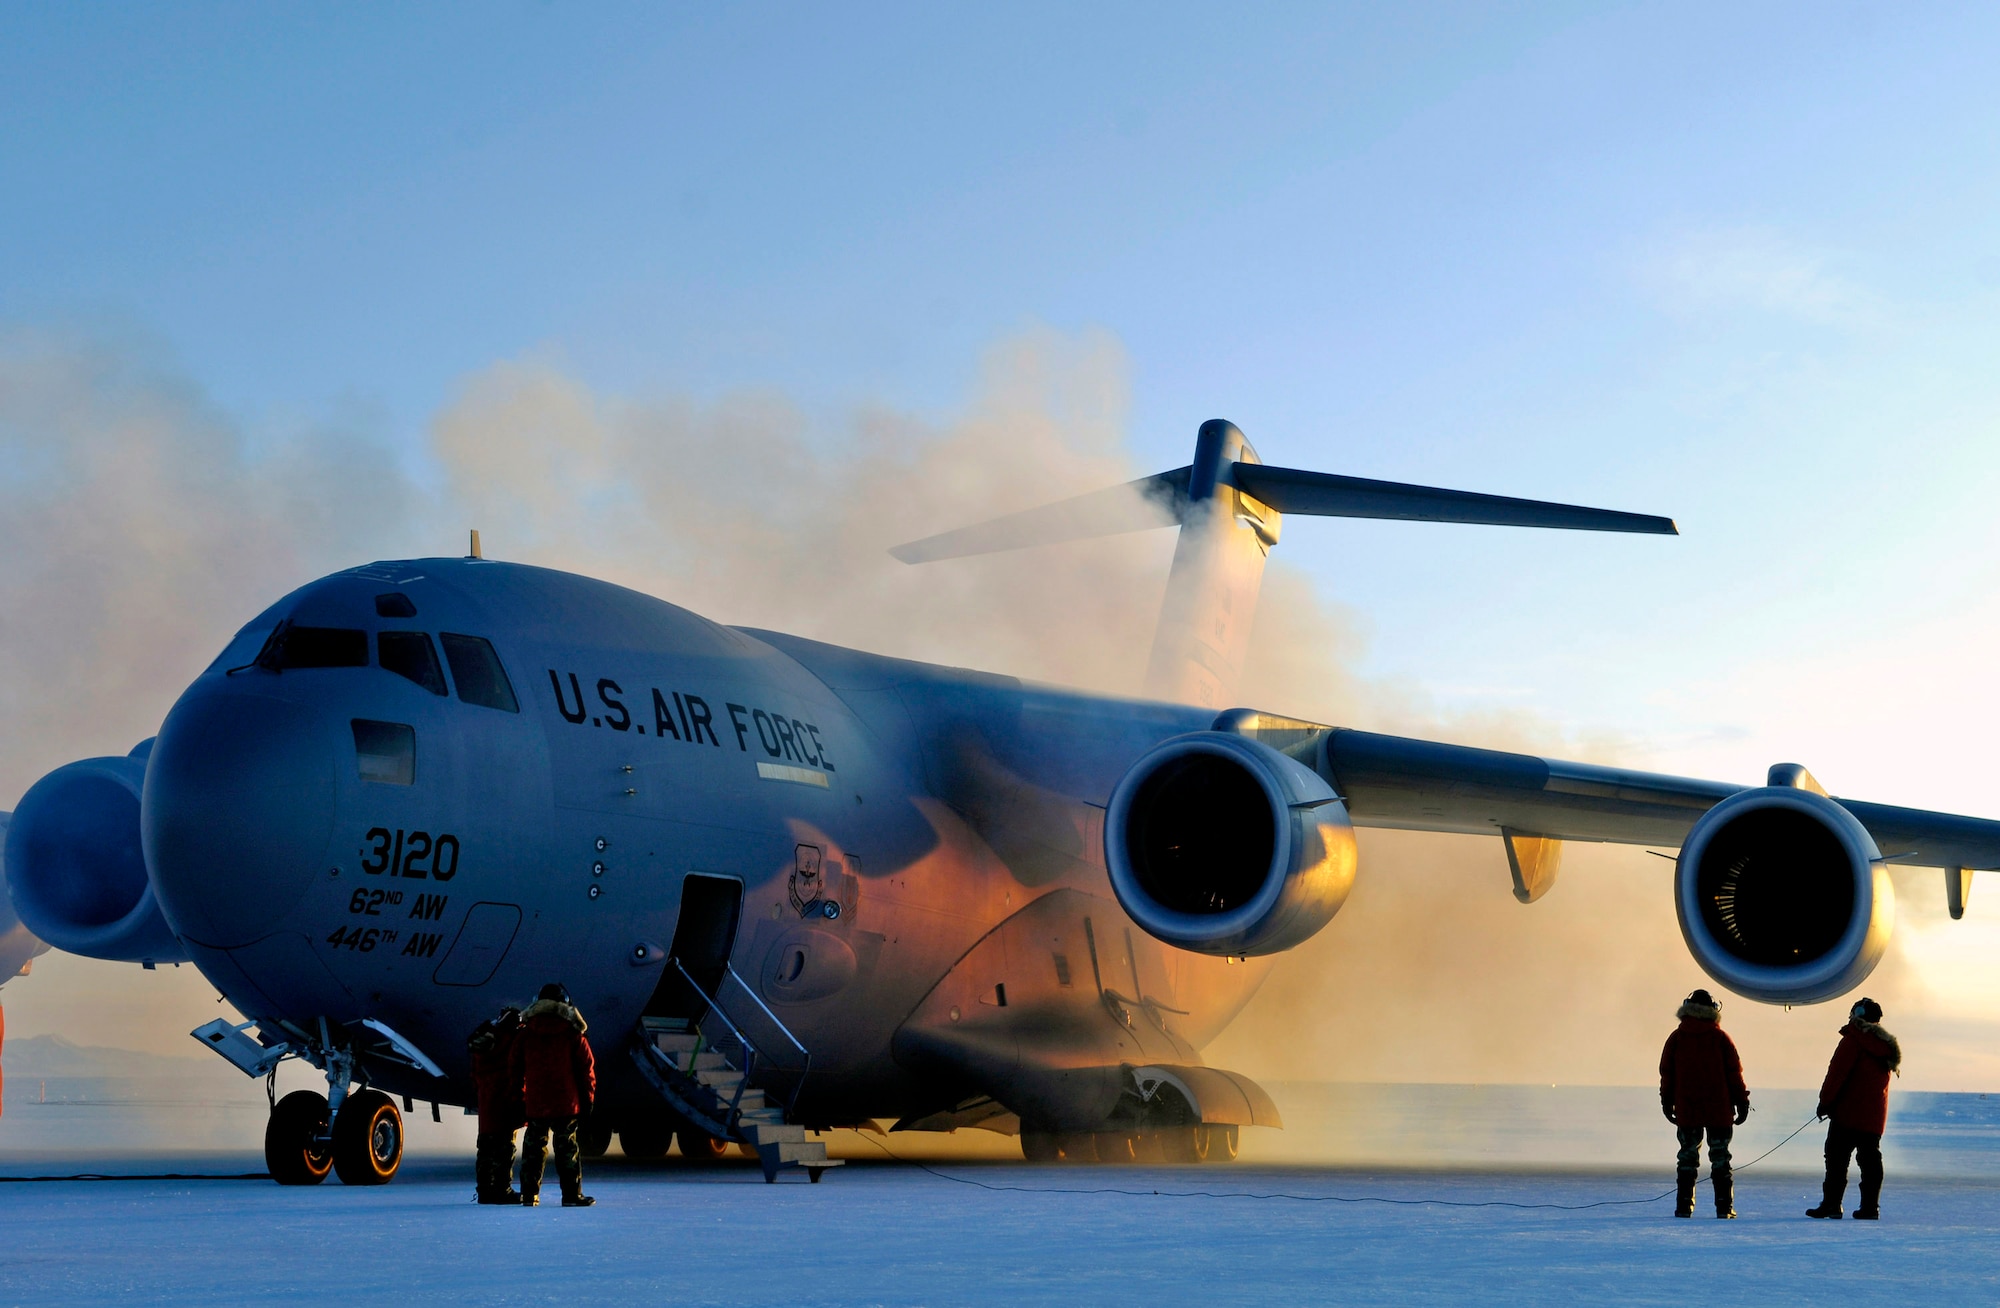 Exhaust vapors form around a C-17 Globemaster III after engine start-up during an Operation Deep Freeze winter fly-in mission Aug. 25 at Pegasus White Ice Runway, Antarctica. A C-17 and 31 Airmen from McChord Air Force Base, Wash., conducted the annual winter fly-in augmentation of scientists, support staff, food and equipment for the U.S. Antarctic Program at McMurdo Station, Antarctica. (U.S. Air Force photo/Tech. Sgt. Shane A. Cuomo) 
